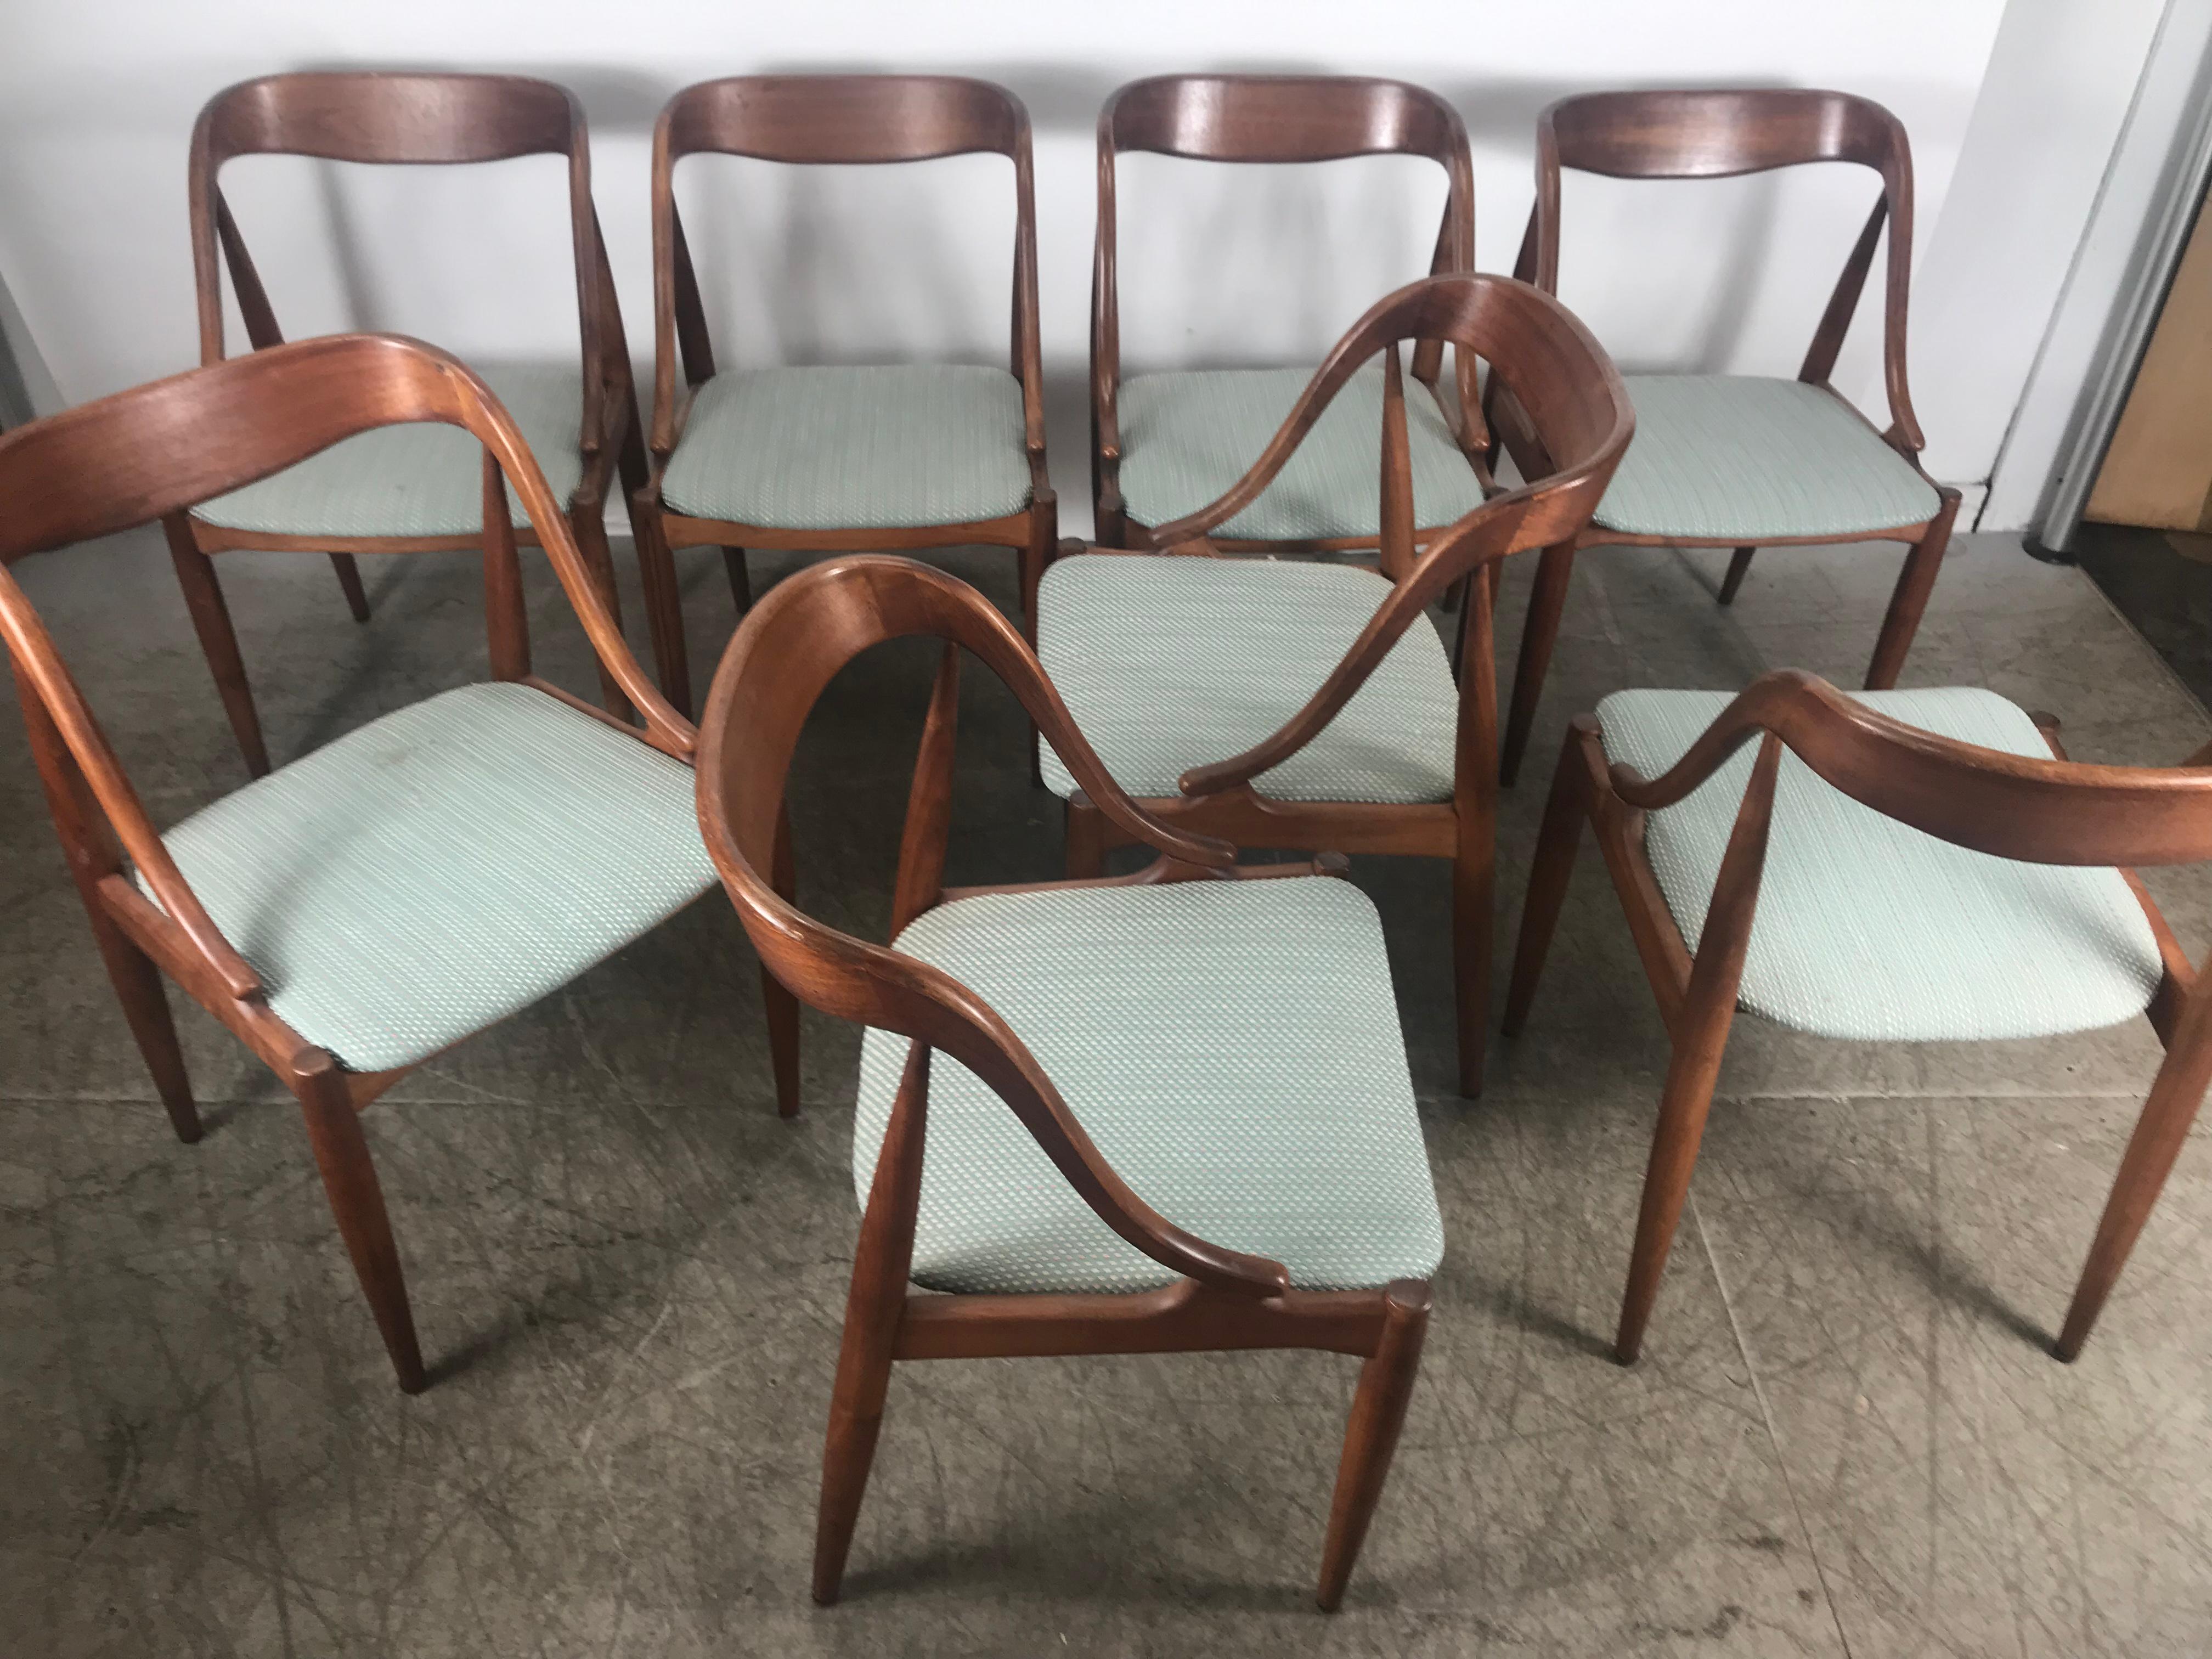 Set of 8 teak dining chairs by Johannes Andersen for Moreddi, Denmark, worldwide known and appreciated furniture designer Johannes Andersen. His designs are considered high end Danish modern design. The chairs feature Andersen’s characteristic